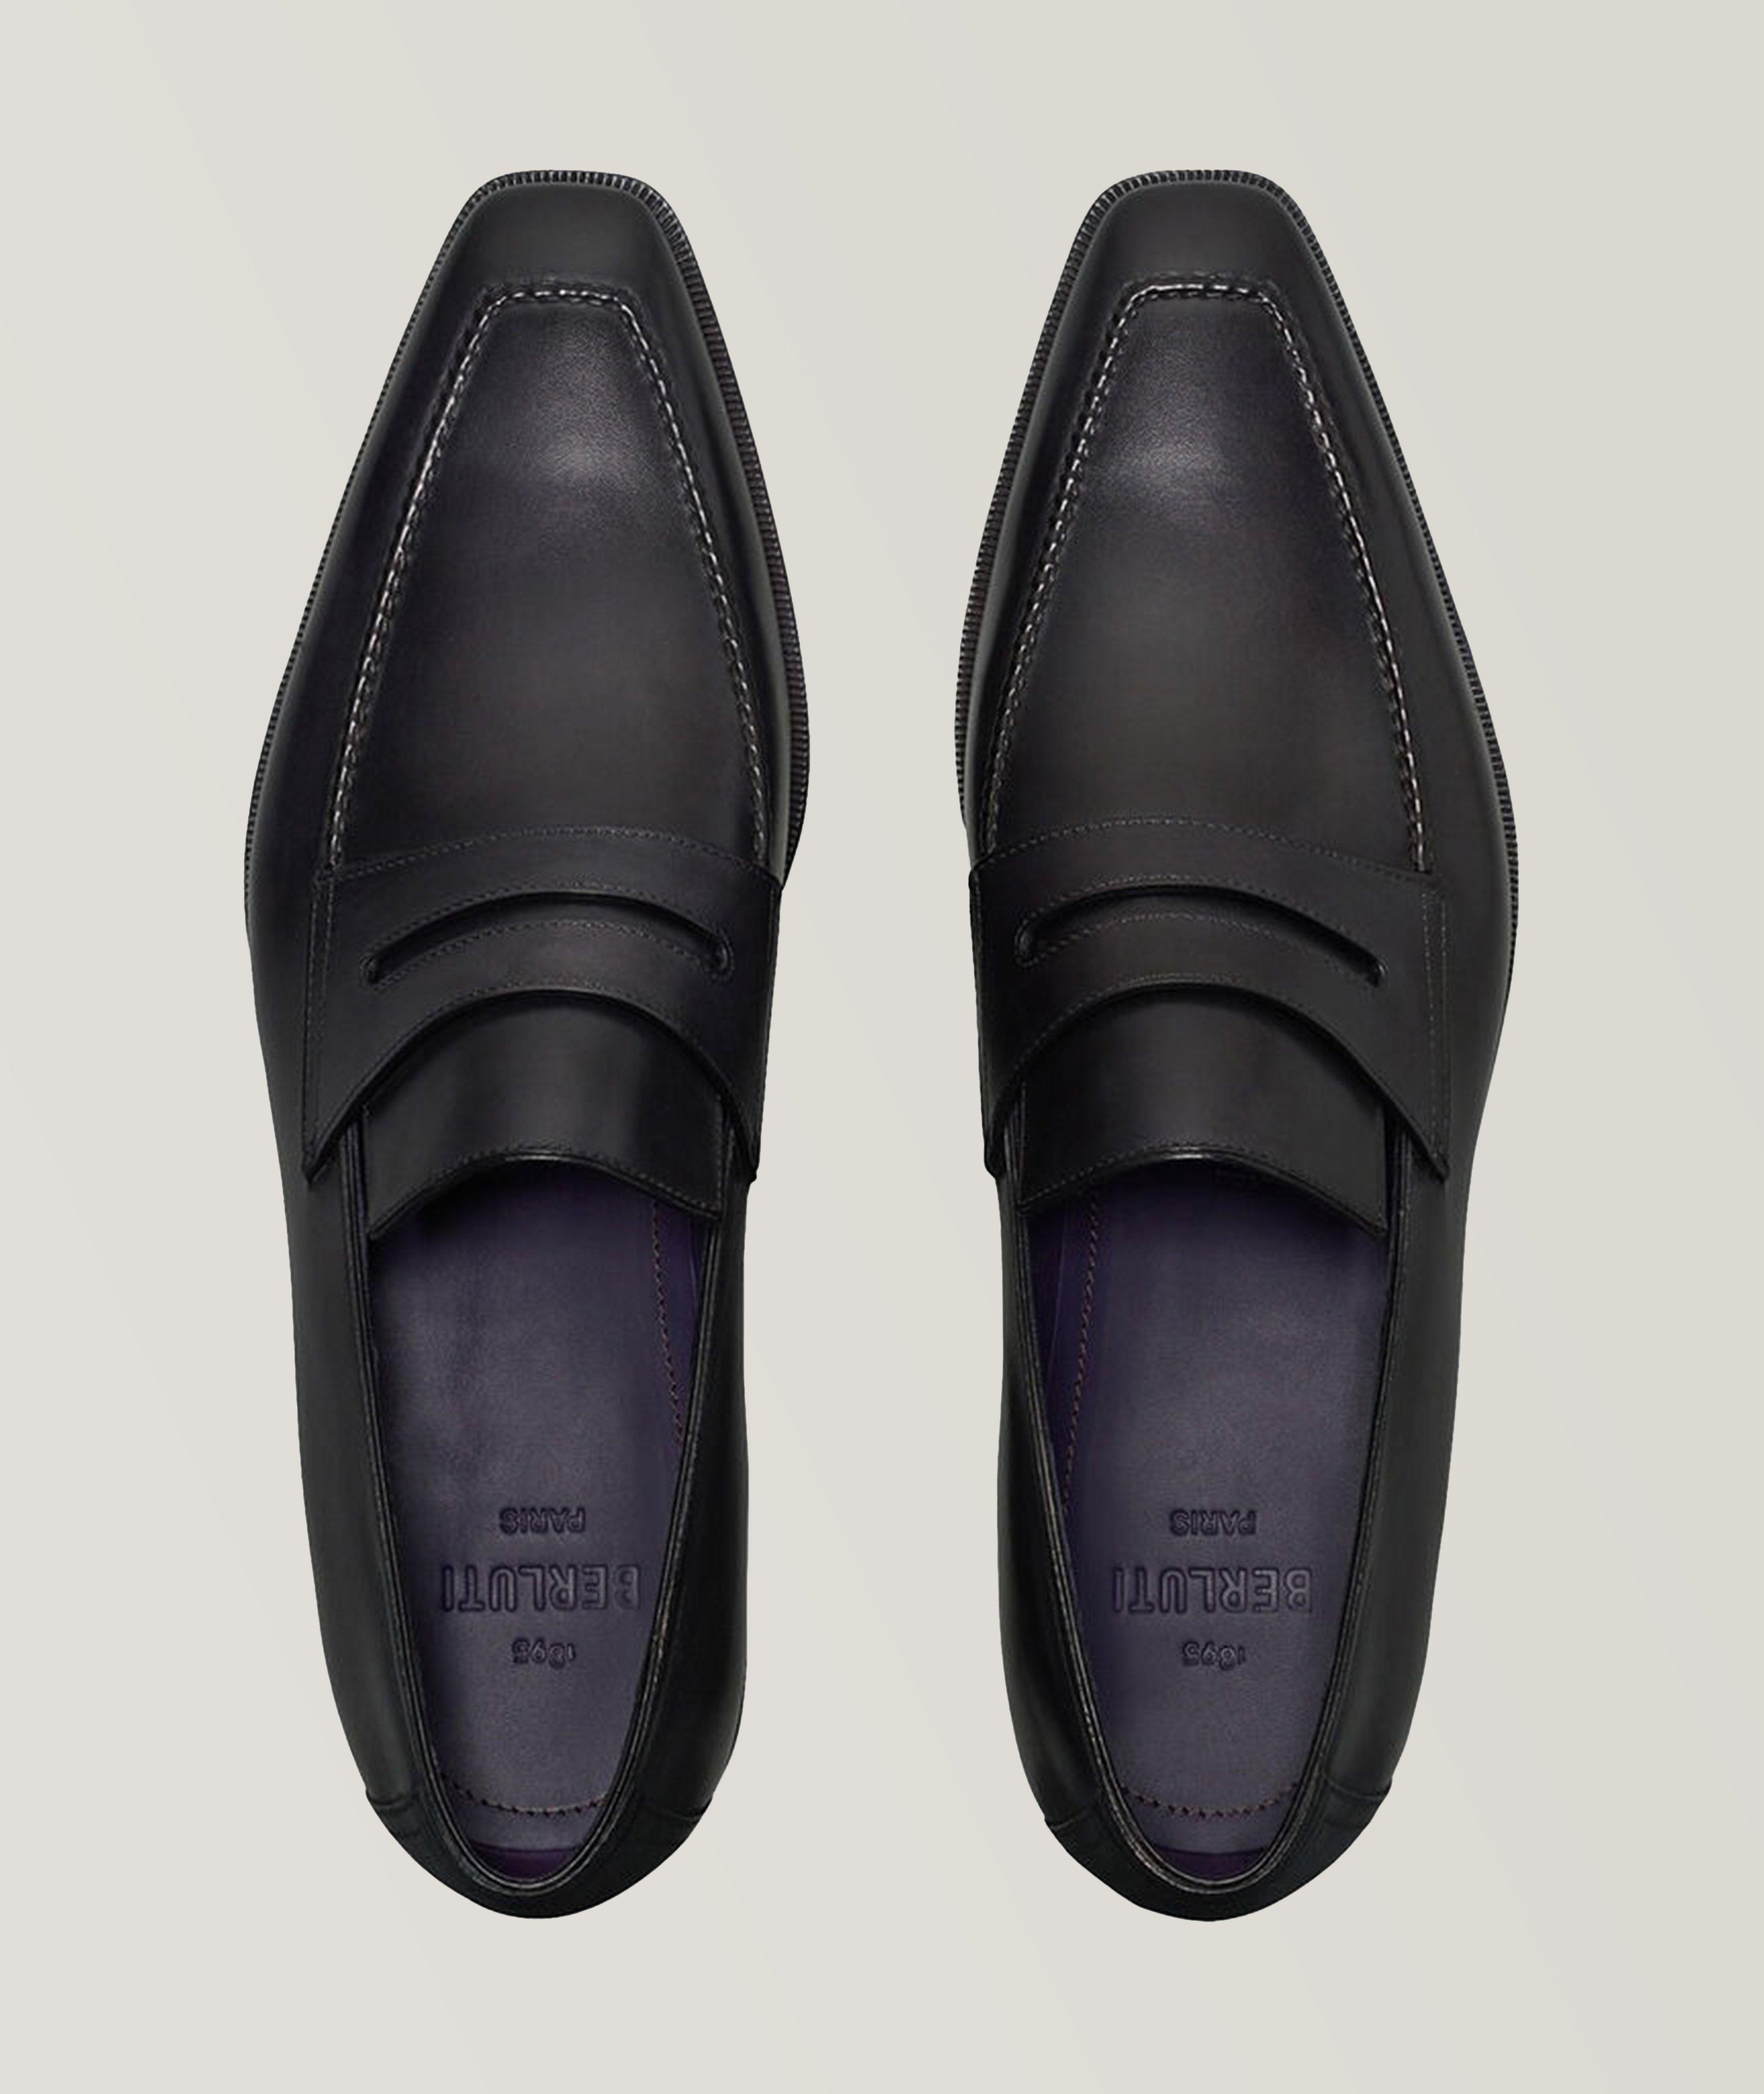 Andy Demesure Leather Loafer image 3